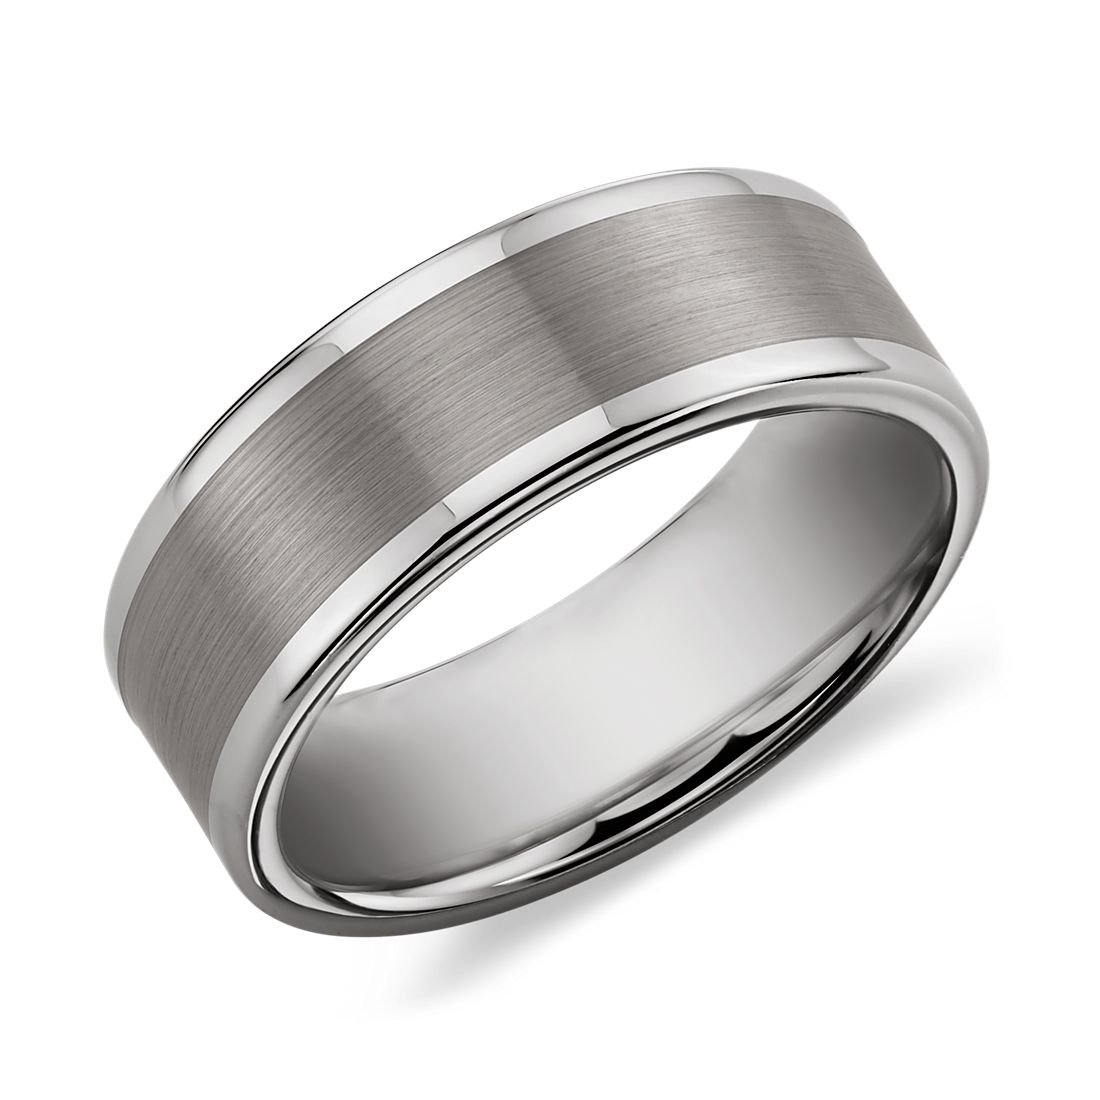 Bishilin Tungsten Carbide Polished Edge Silver Wedding Band Ring Brushed Center 4MM for Women Men,Size 7 